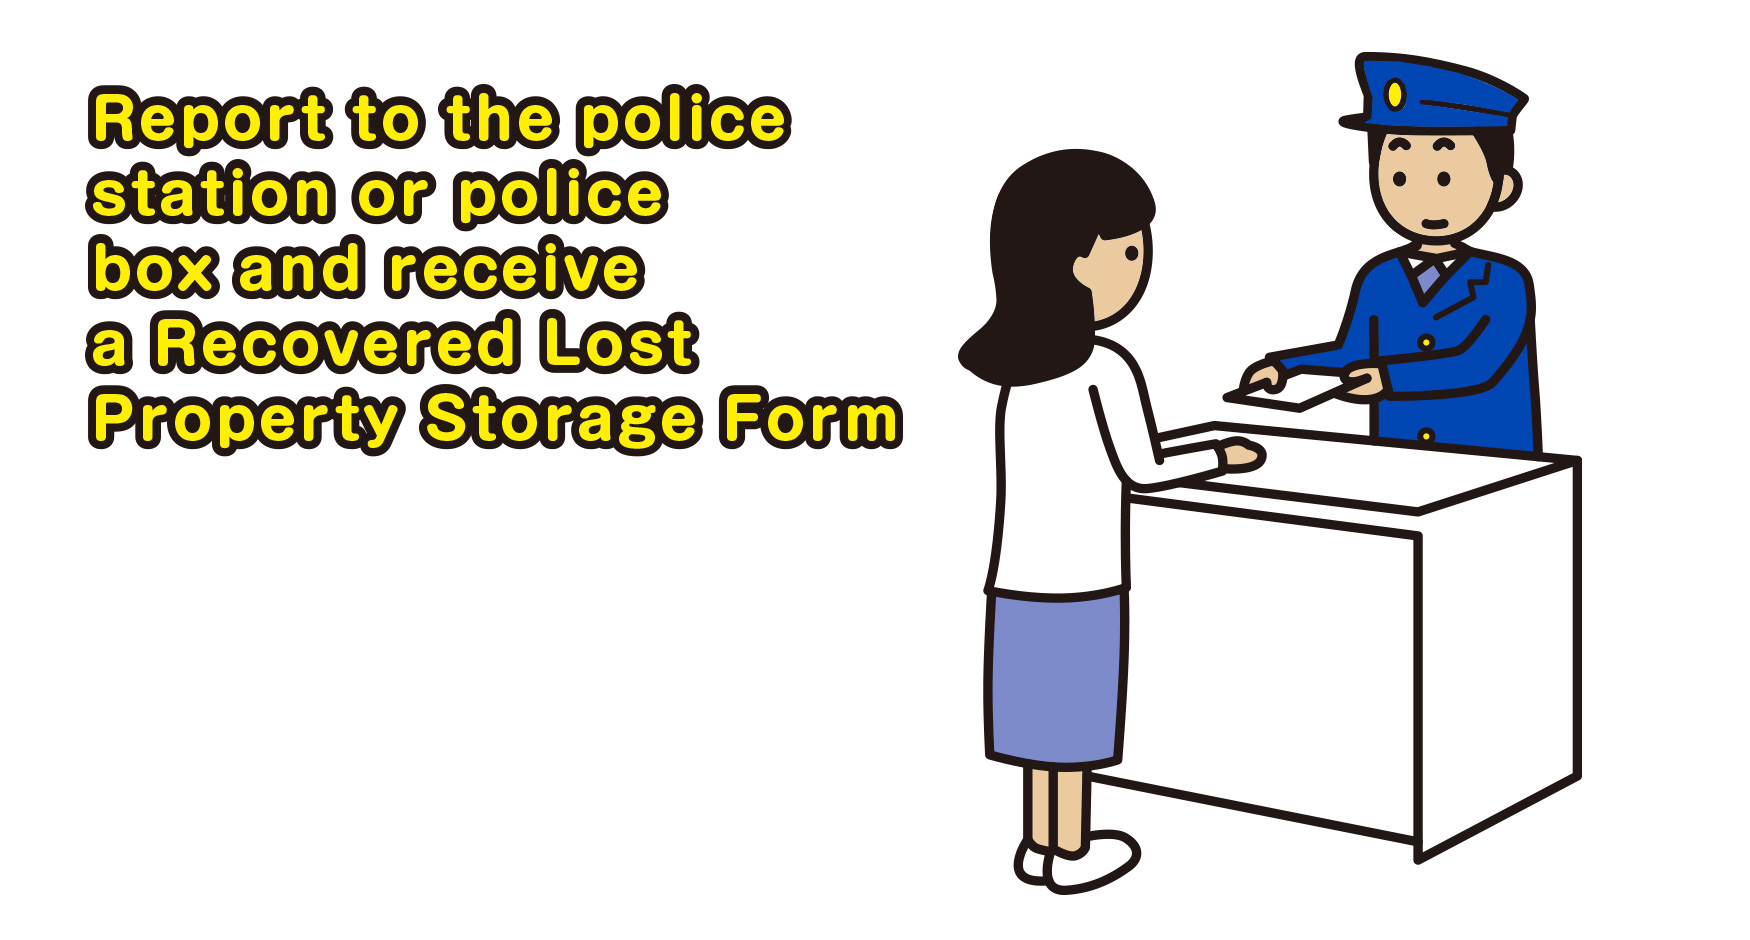 Report to the police station or police box and receive a Recovered Lost Property Storage Form